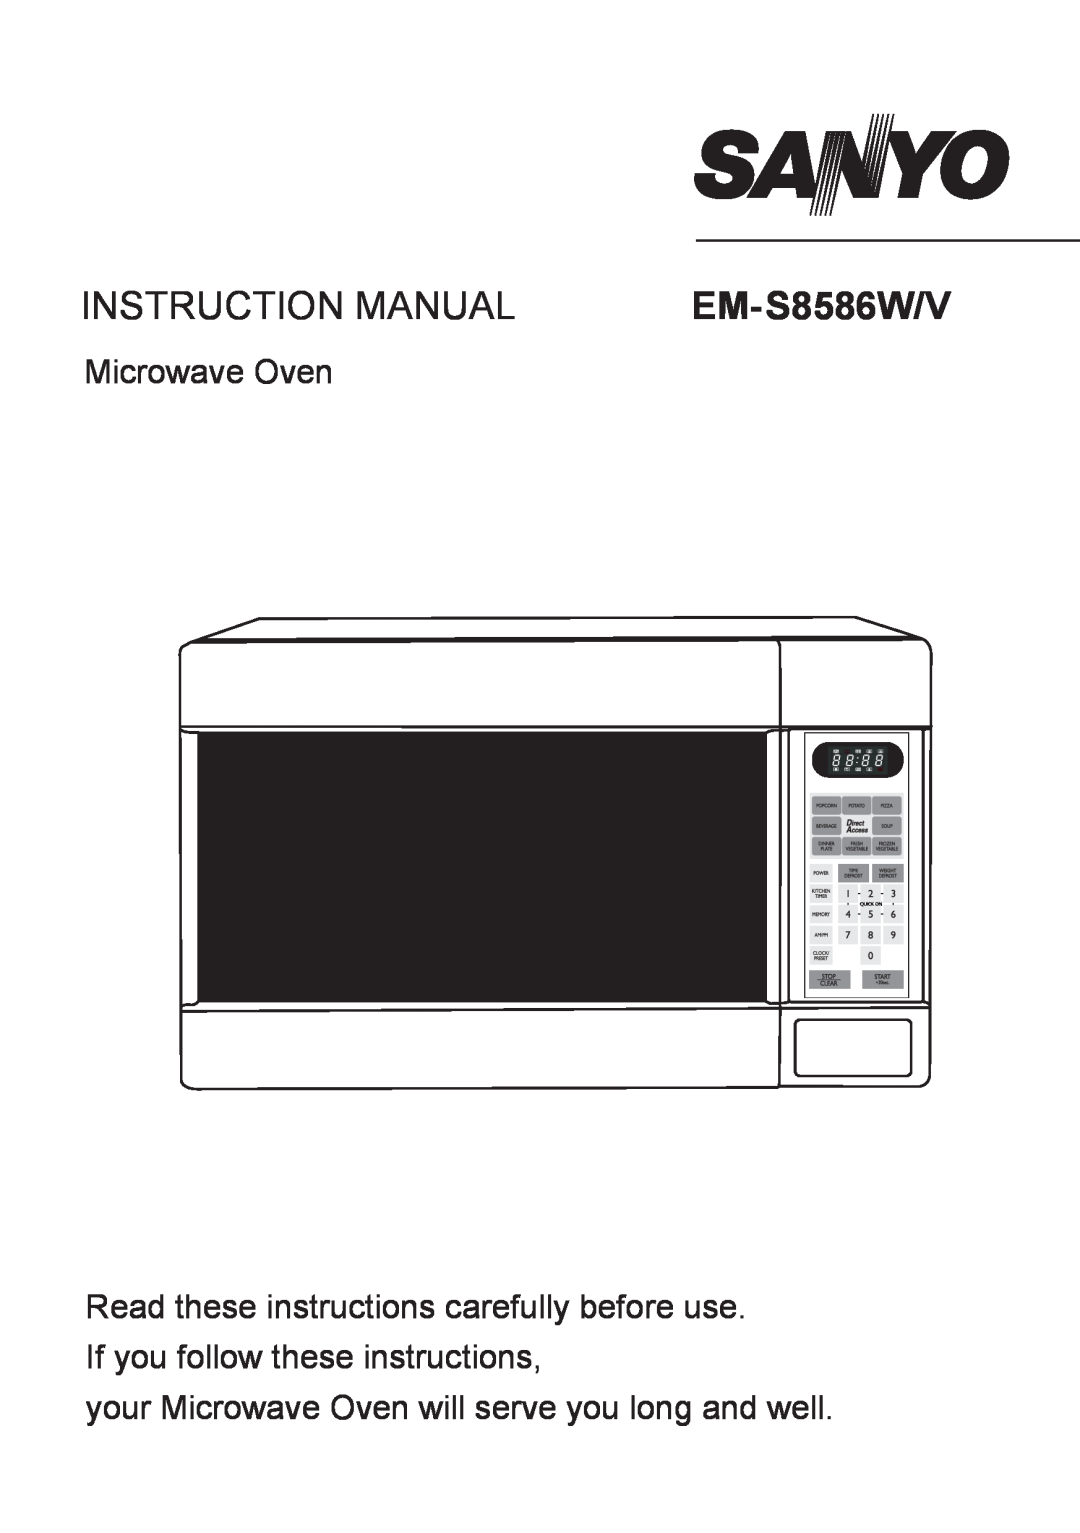 Sanyo EM-S8586V instruction manual your Microwave Oven will serve you long and well, Instruction Manual, EM-S8586W/V 